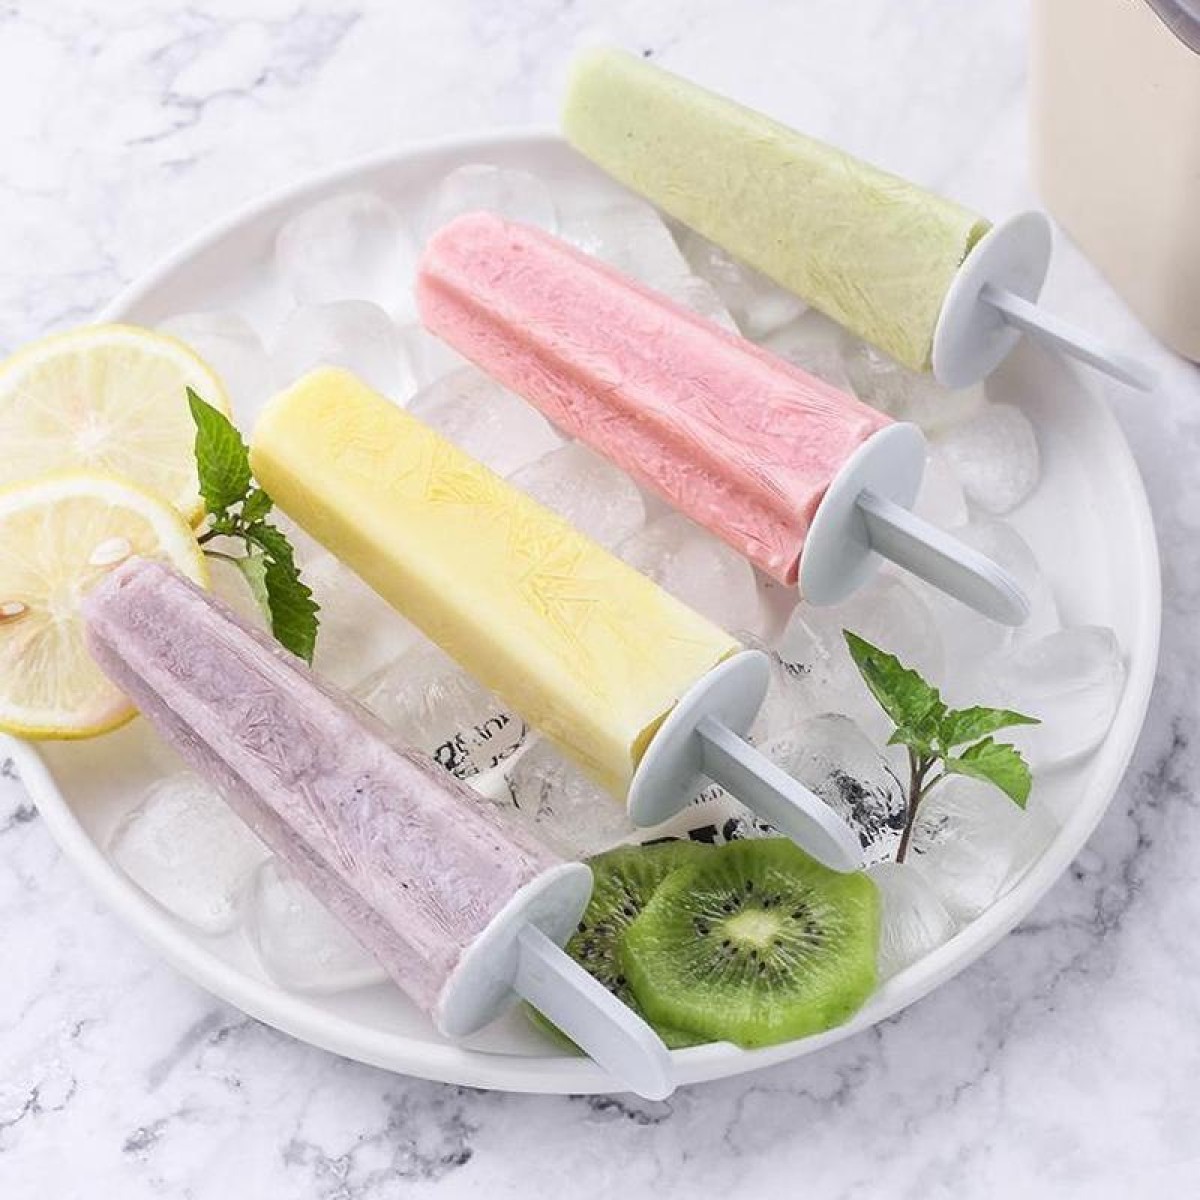 Summer DIY Creative Popsicle Ice Cream Mould Ice Box(Green)